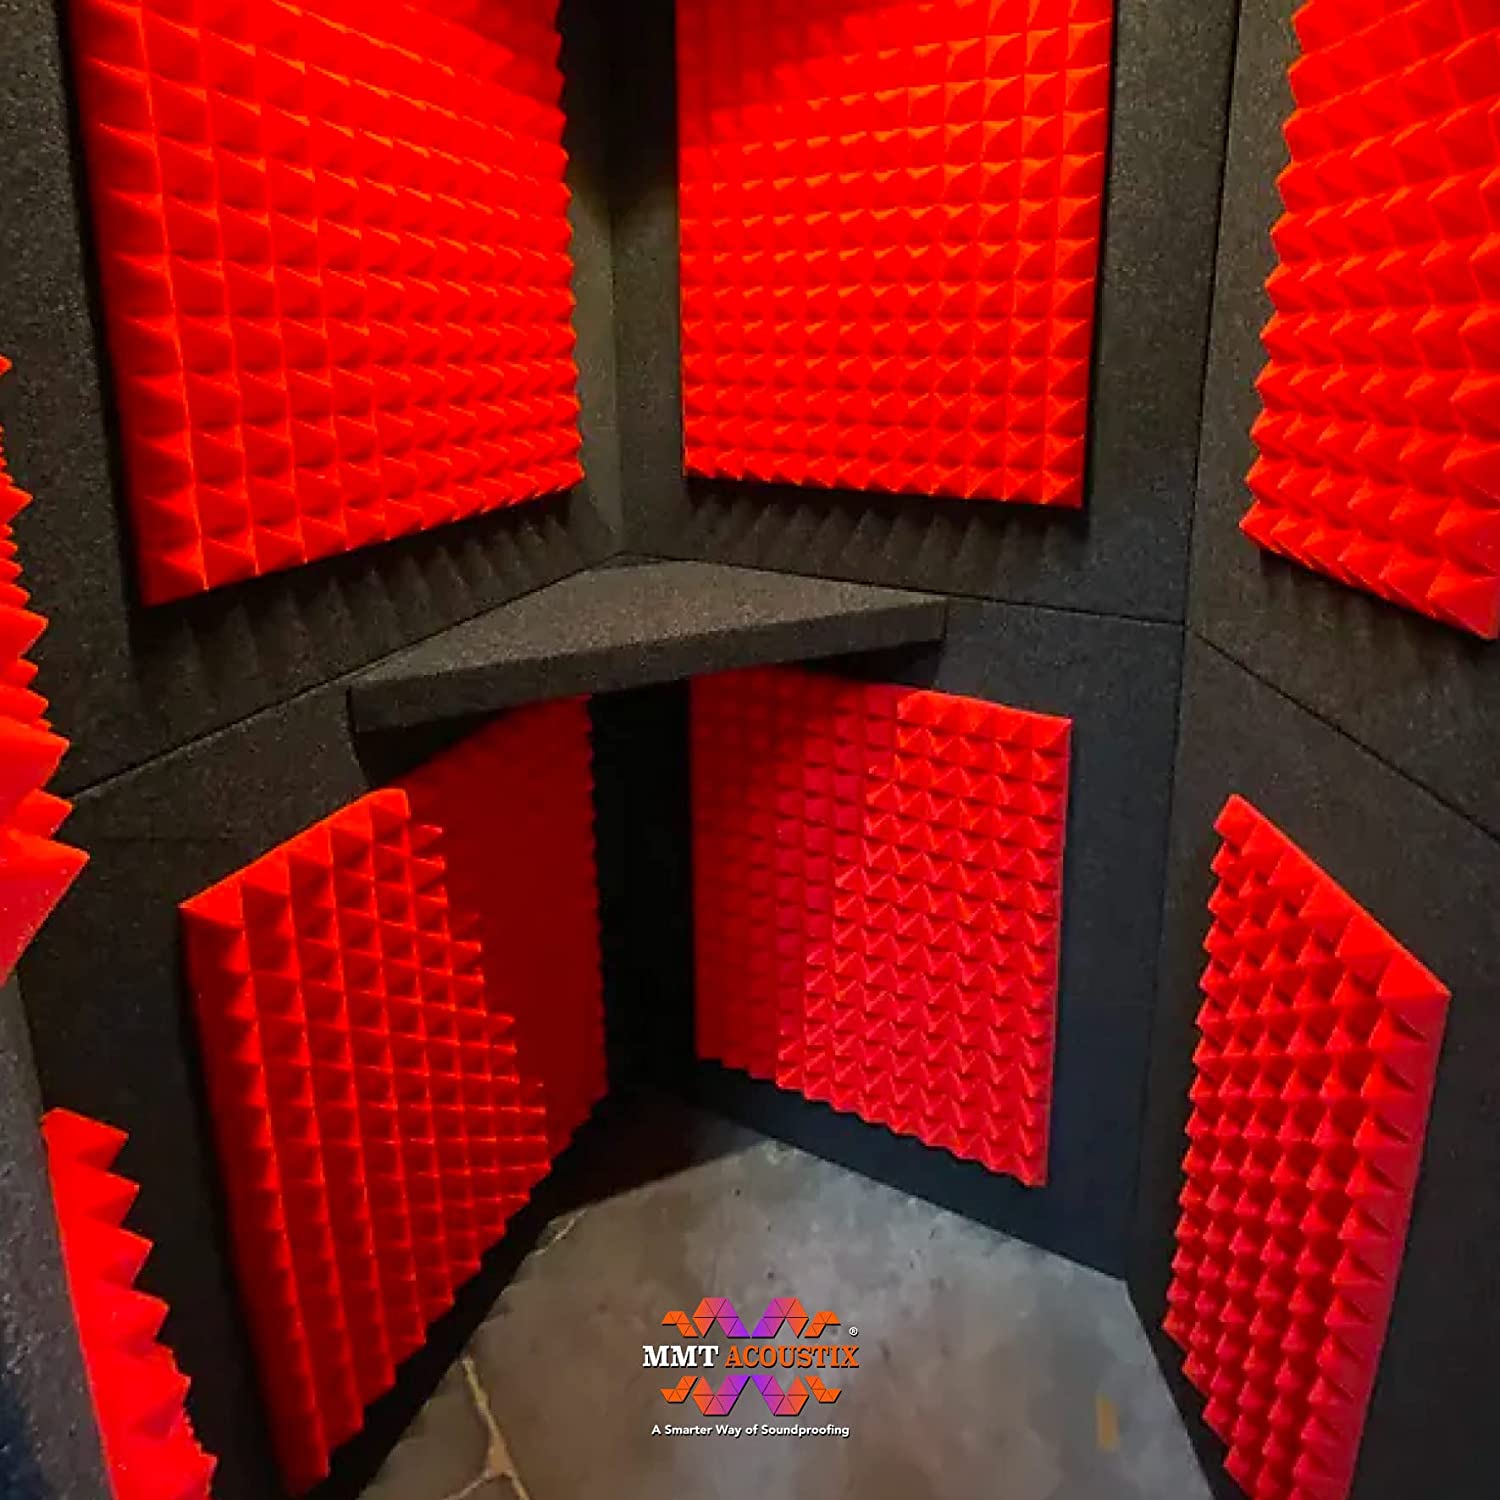 Pyramid Acoustic Foam Panels for soundproofing and acoustic treatment ...